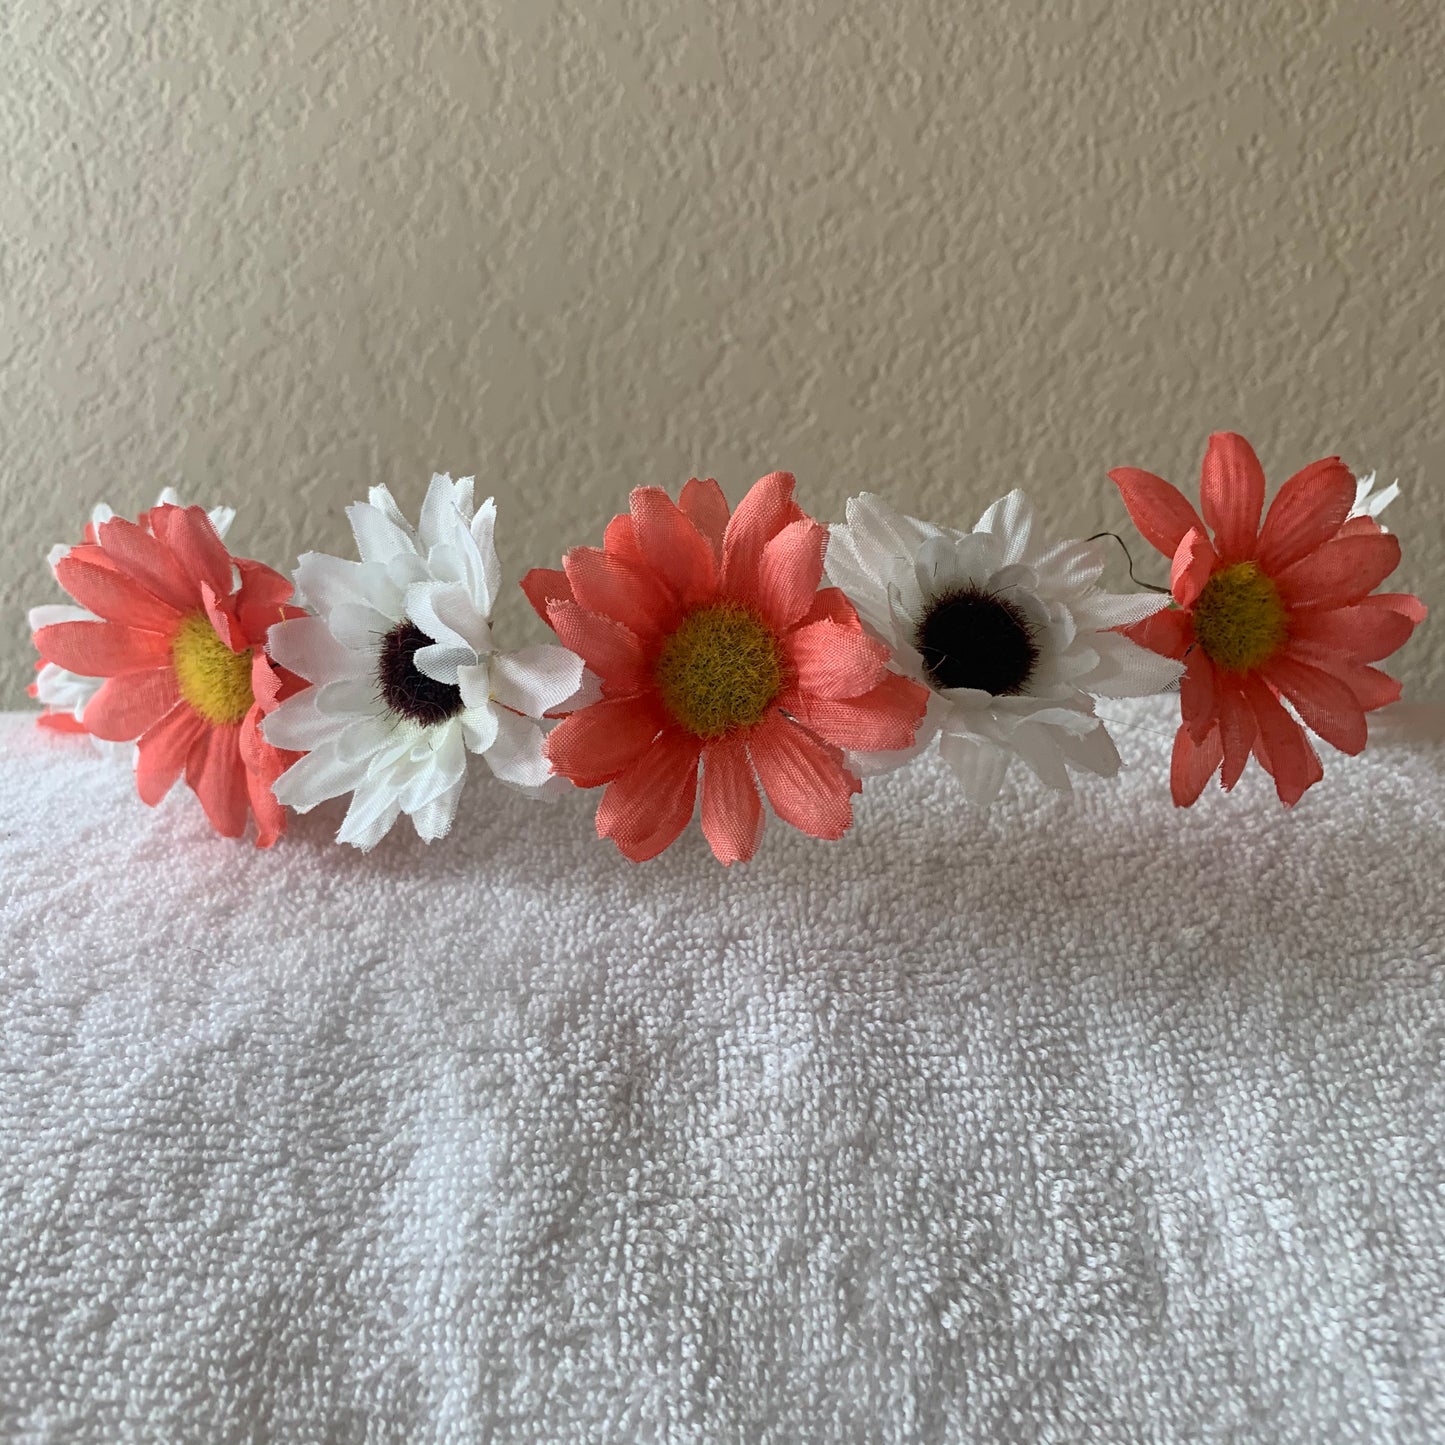 Small Wreath Lighted - Peach and White Pointy Daisies